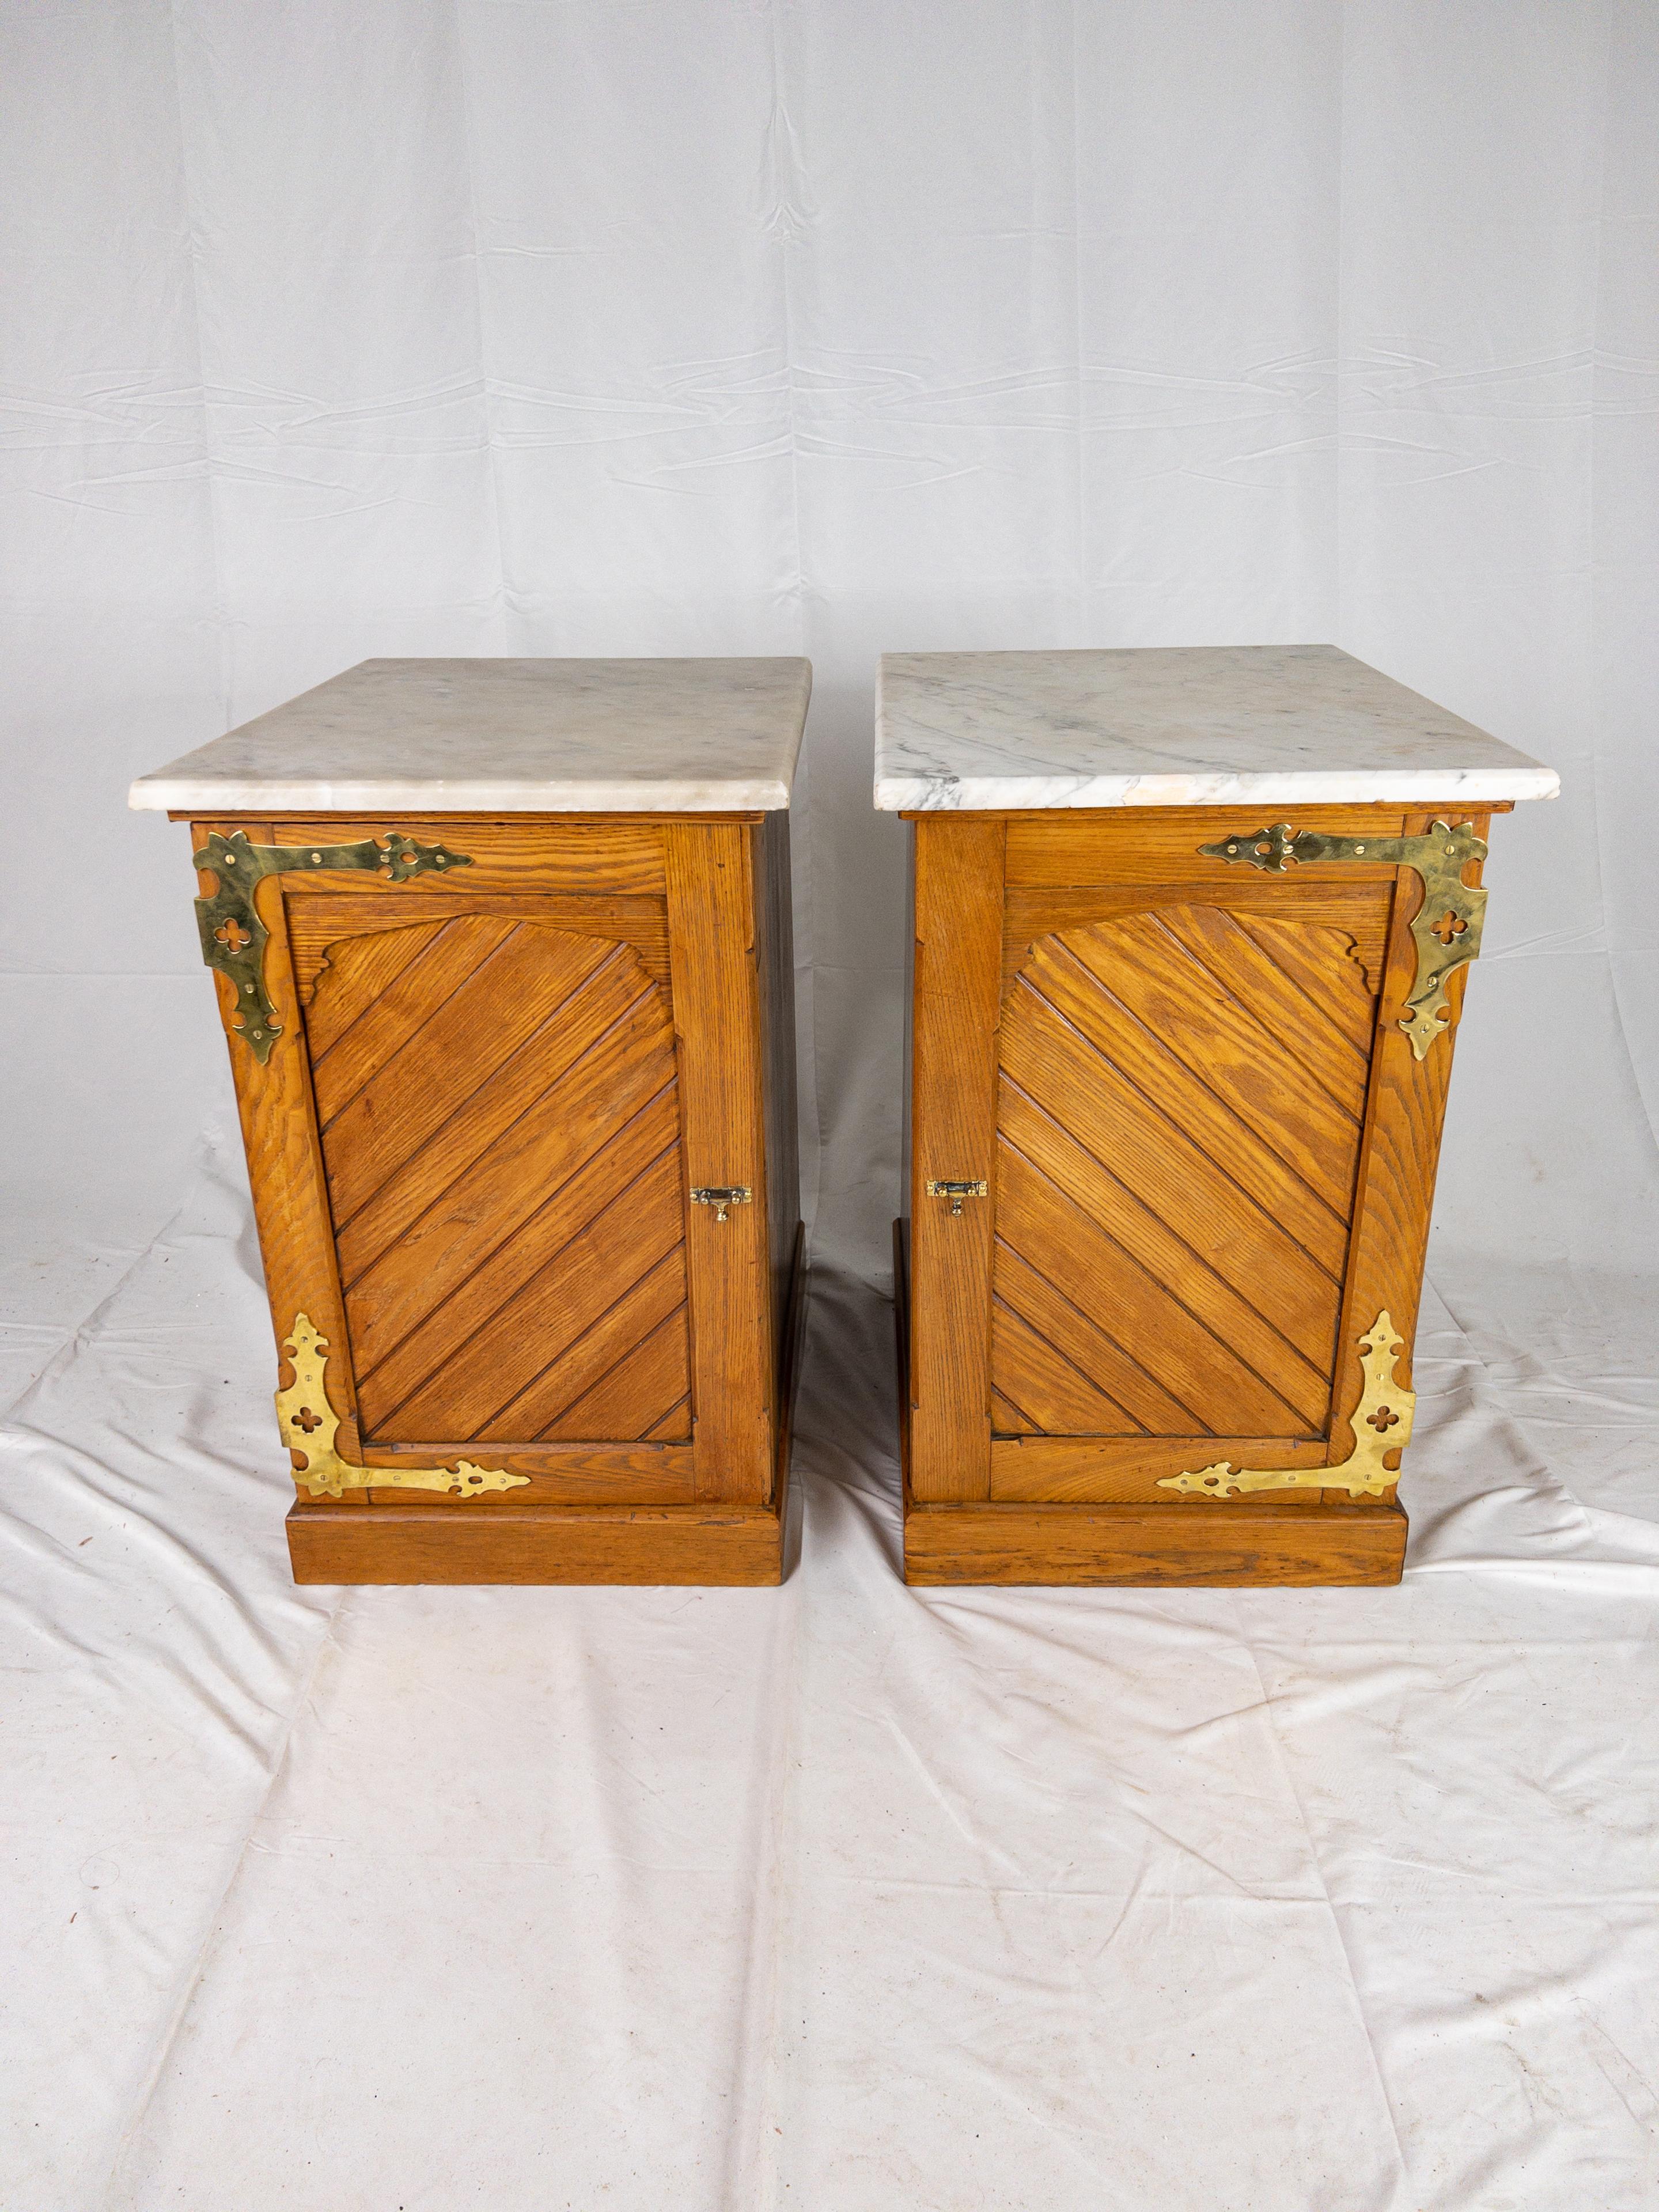 Pair of English Marble Top Side Cabinets having beveled marble tops and a plinth base. The cabinets have doors with a diagonal wood pattern and prominent brass hardware.

Please review all images as they are considered part of the item description.